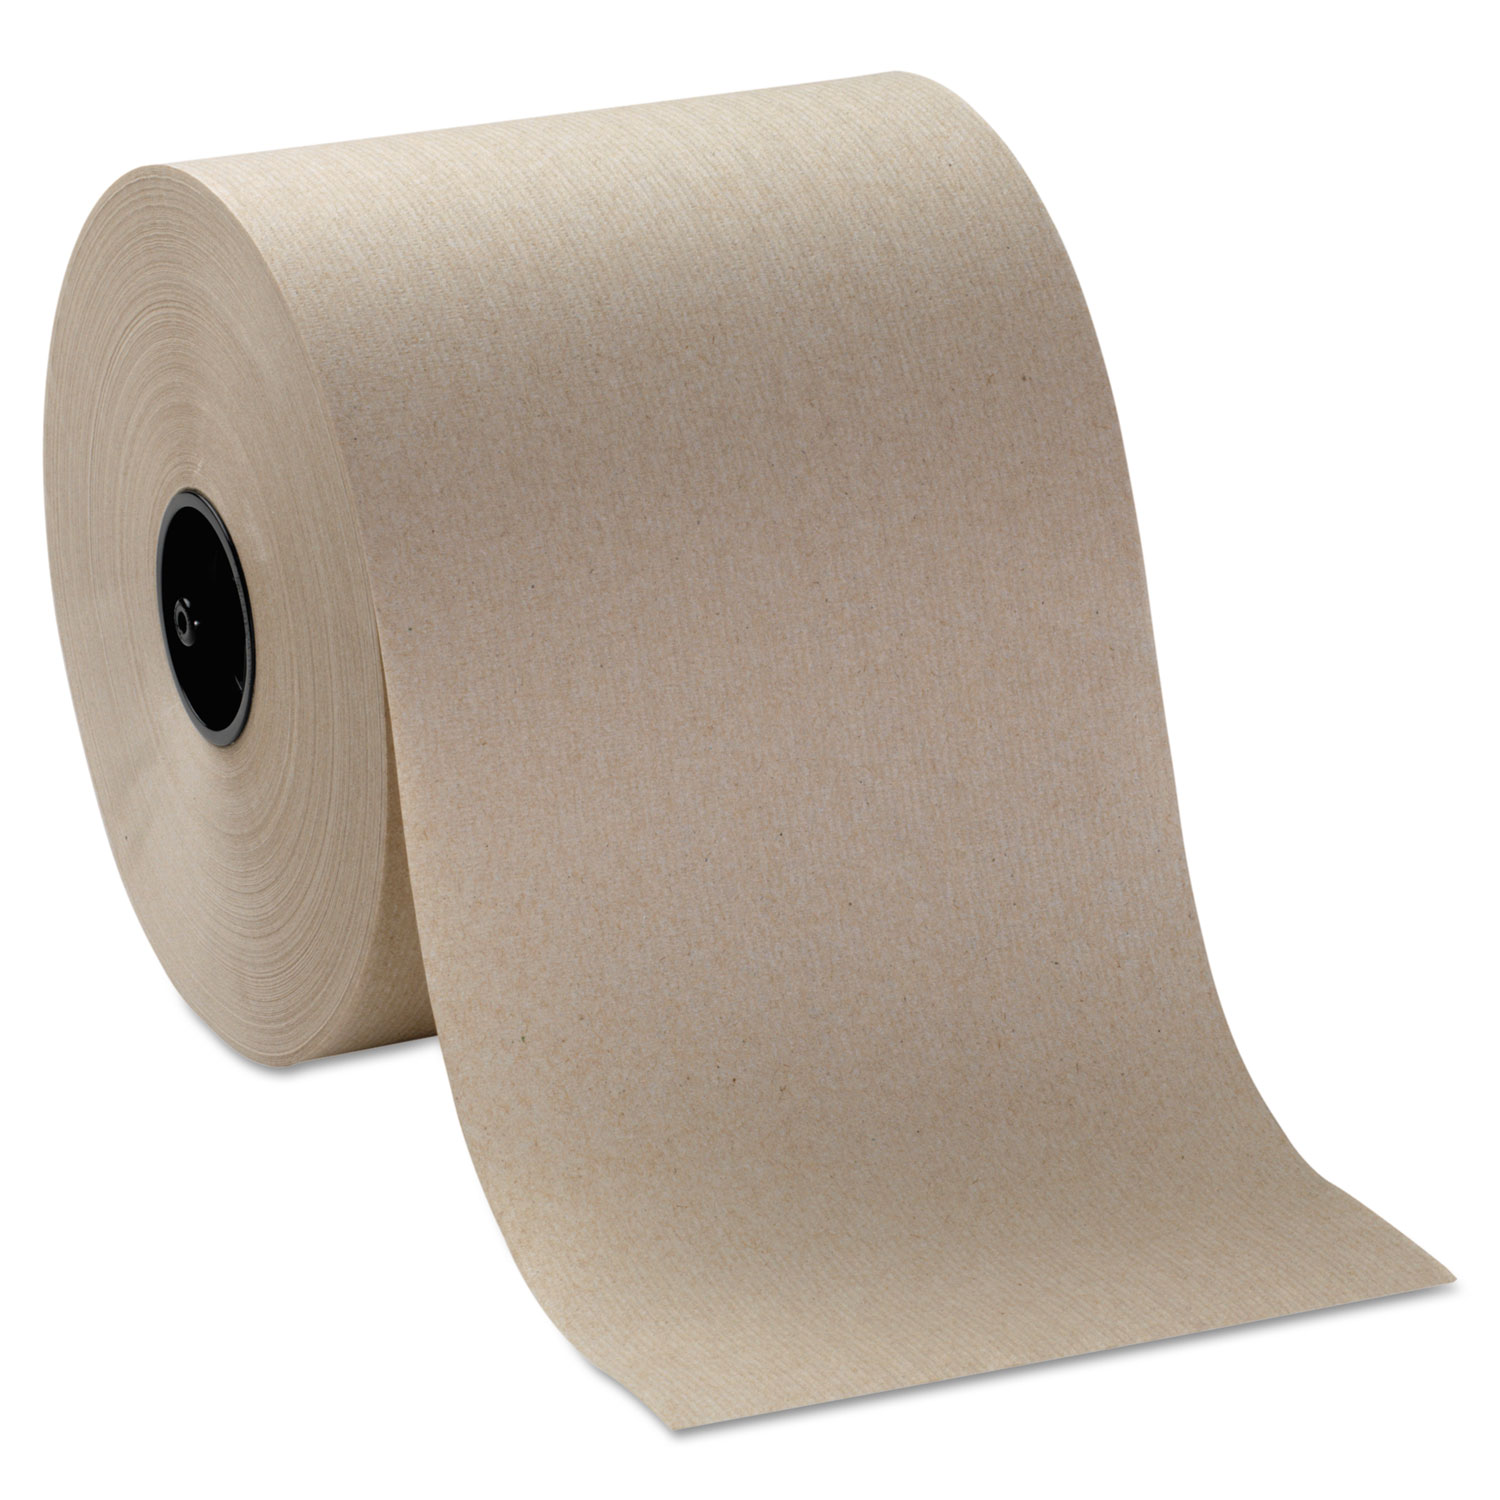  Georgia Pacific Professional 26920 Hardwound Roll Paper Towels, 7 4/5 x 1000ft, Brown, 6 Rolls/Carton (GPC26920) 